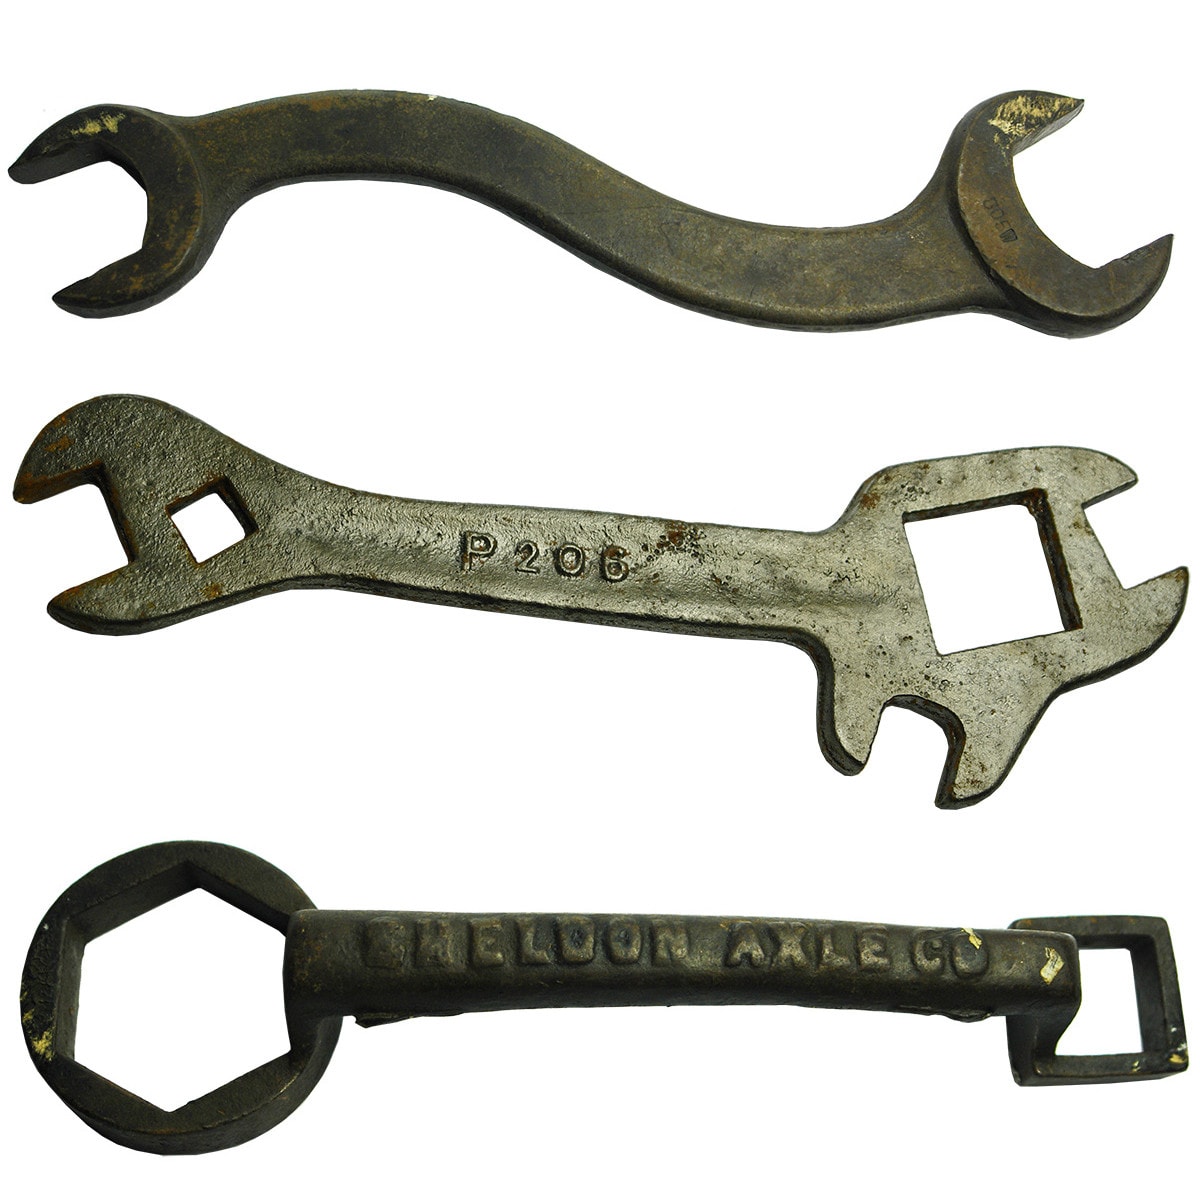 Tools. Three Unusual Tools: Curved Open Ended 305W Spanner; McKay Massey Harris P206 Spanner; Sheldon Axle Co, No. 160 Buggy Wrench.